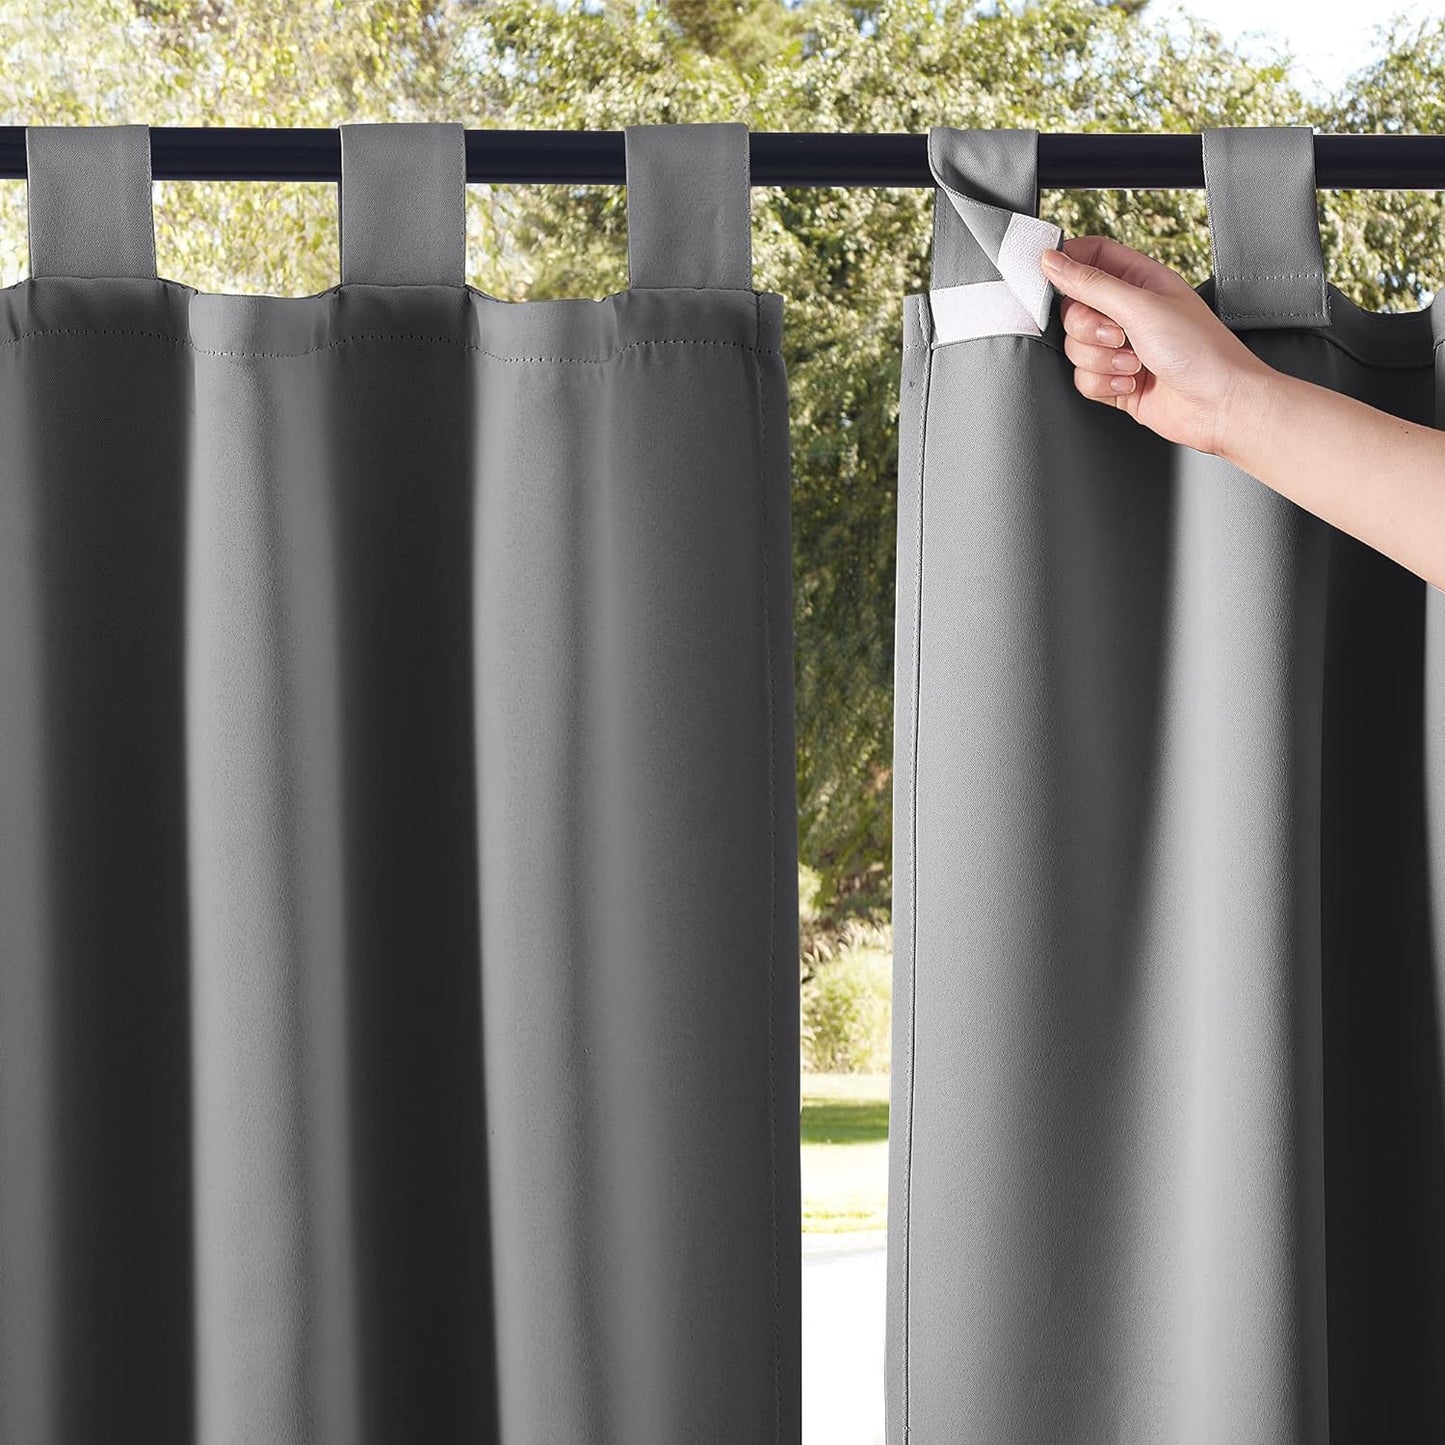 NICETOWN 2 Panels Outdoor Patio Curtainss Waterproof Room Darkening Drapes, Detachable Sticky Tab Top Thermal Insulated Privacy Outdoor Dividers for Porch/Doorway, Biscotti Beige, W52 X L84  NICETOWN Grey W84 X L95 